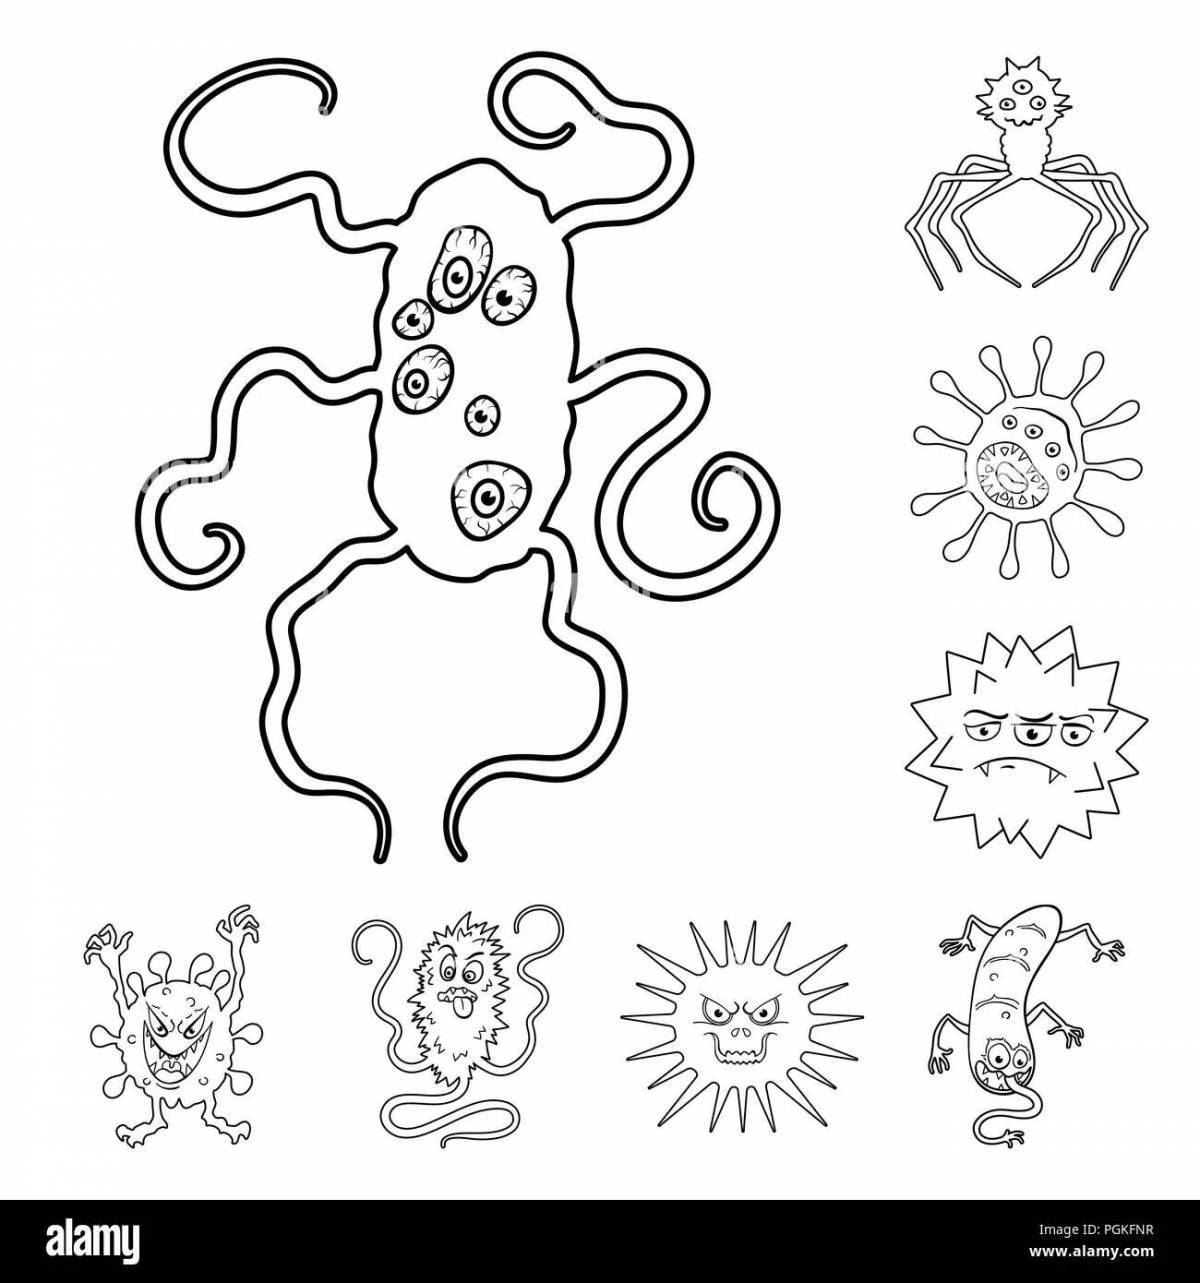 Colorful and suggestive viruses and germs